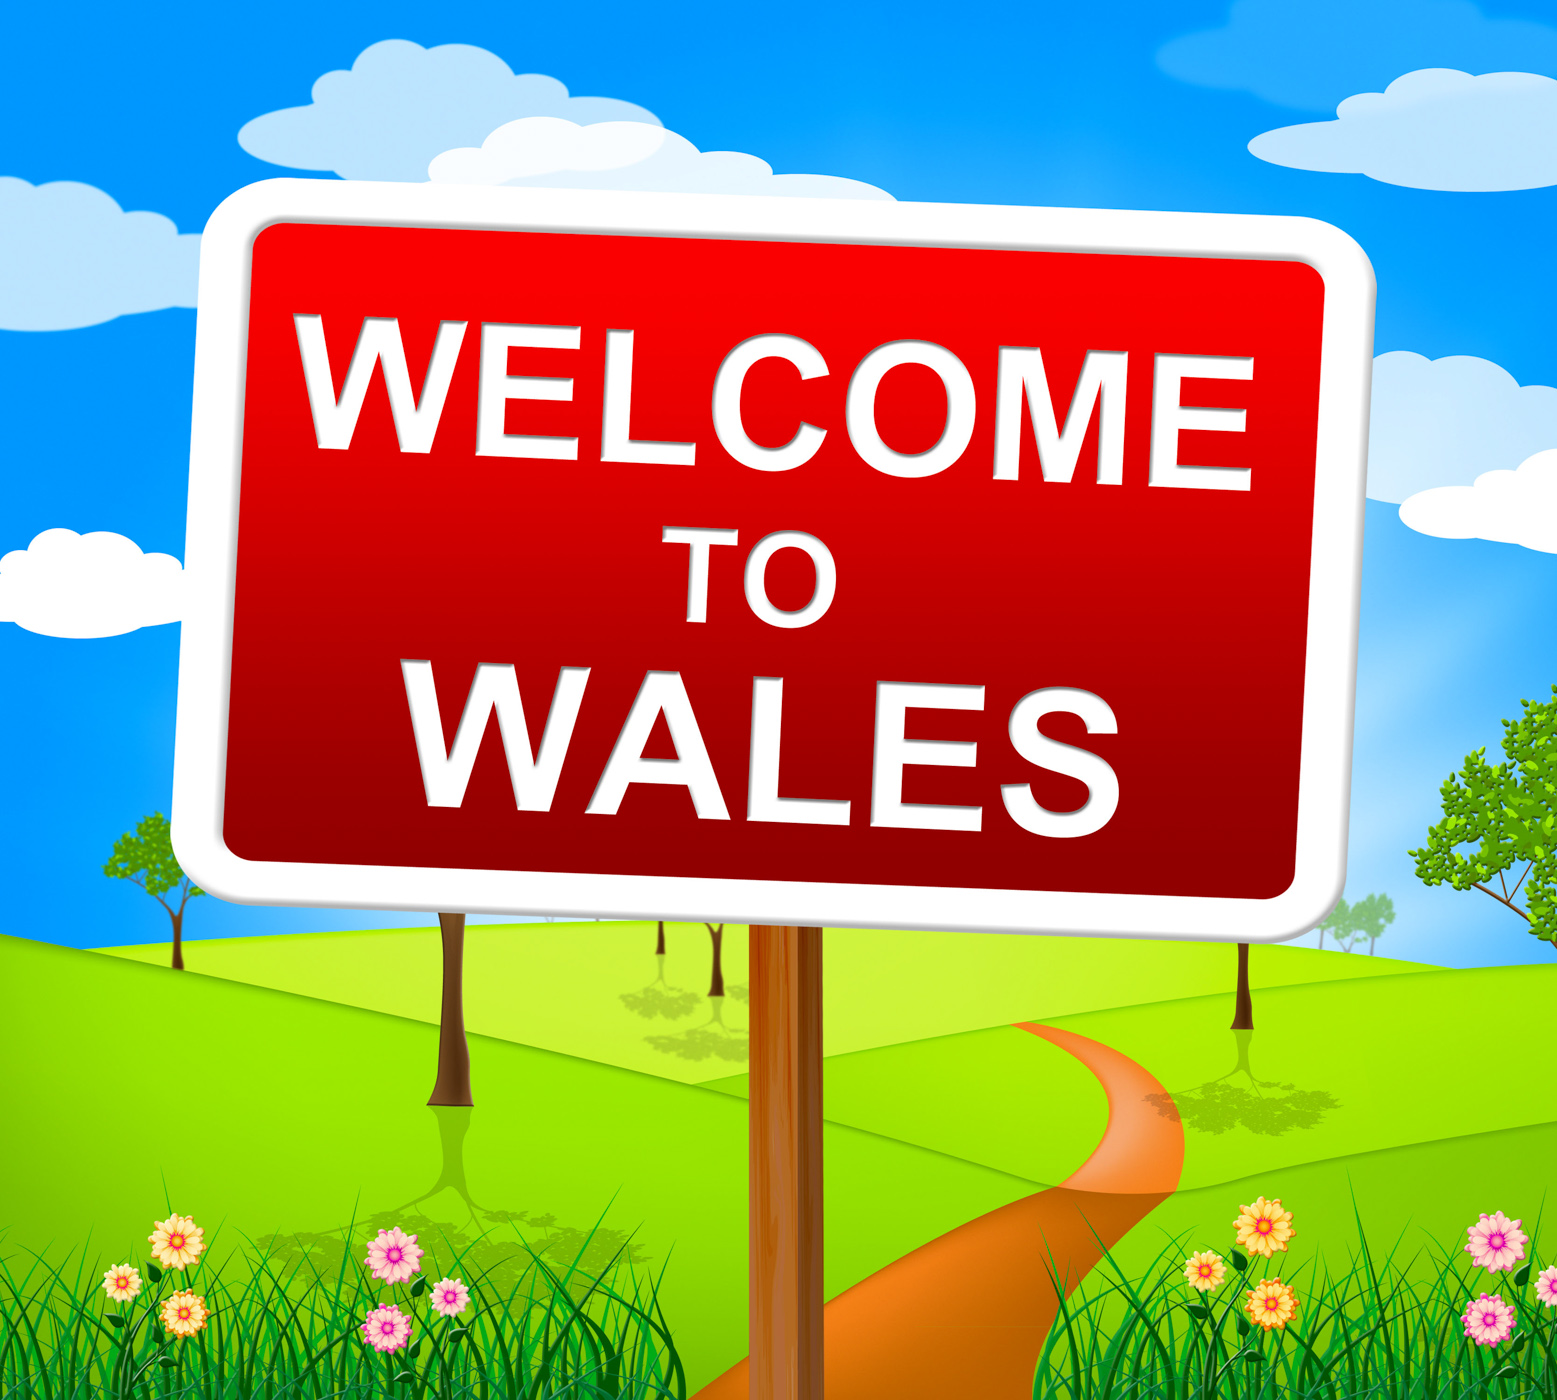 Welcome to wales means invitation countryside and nature photo